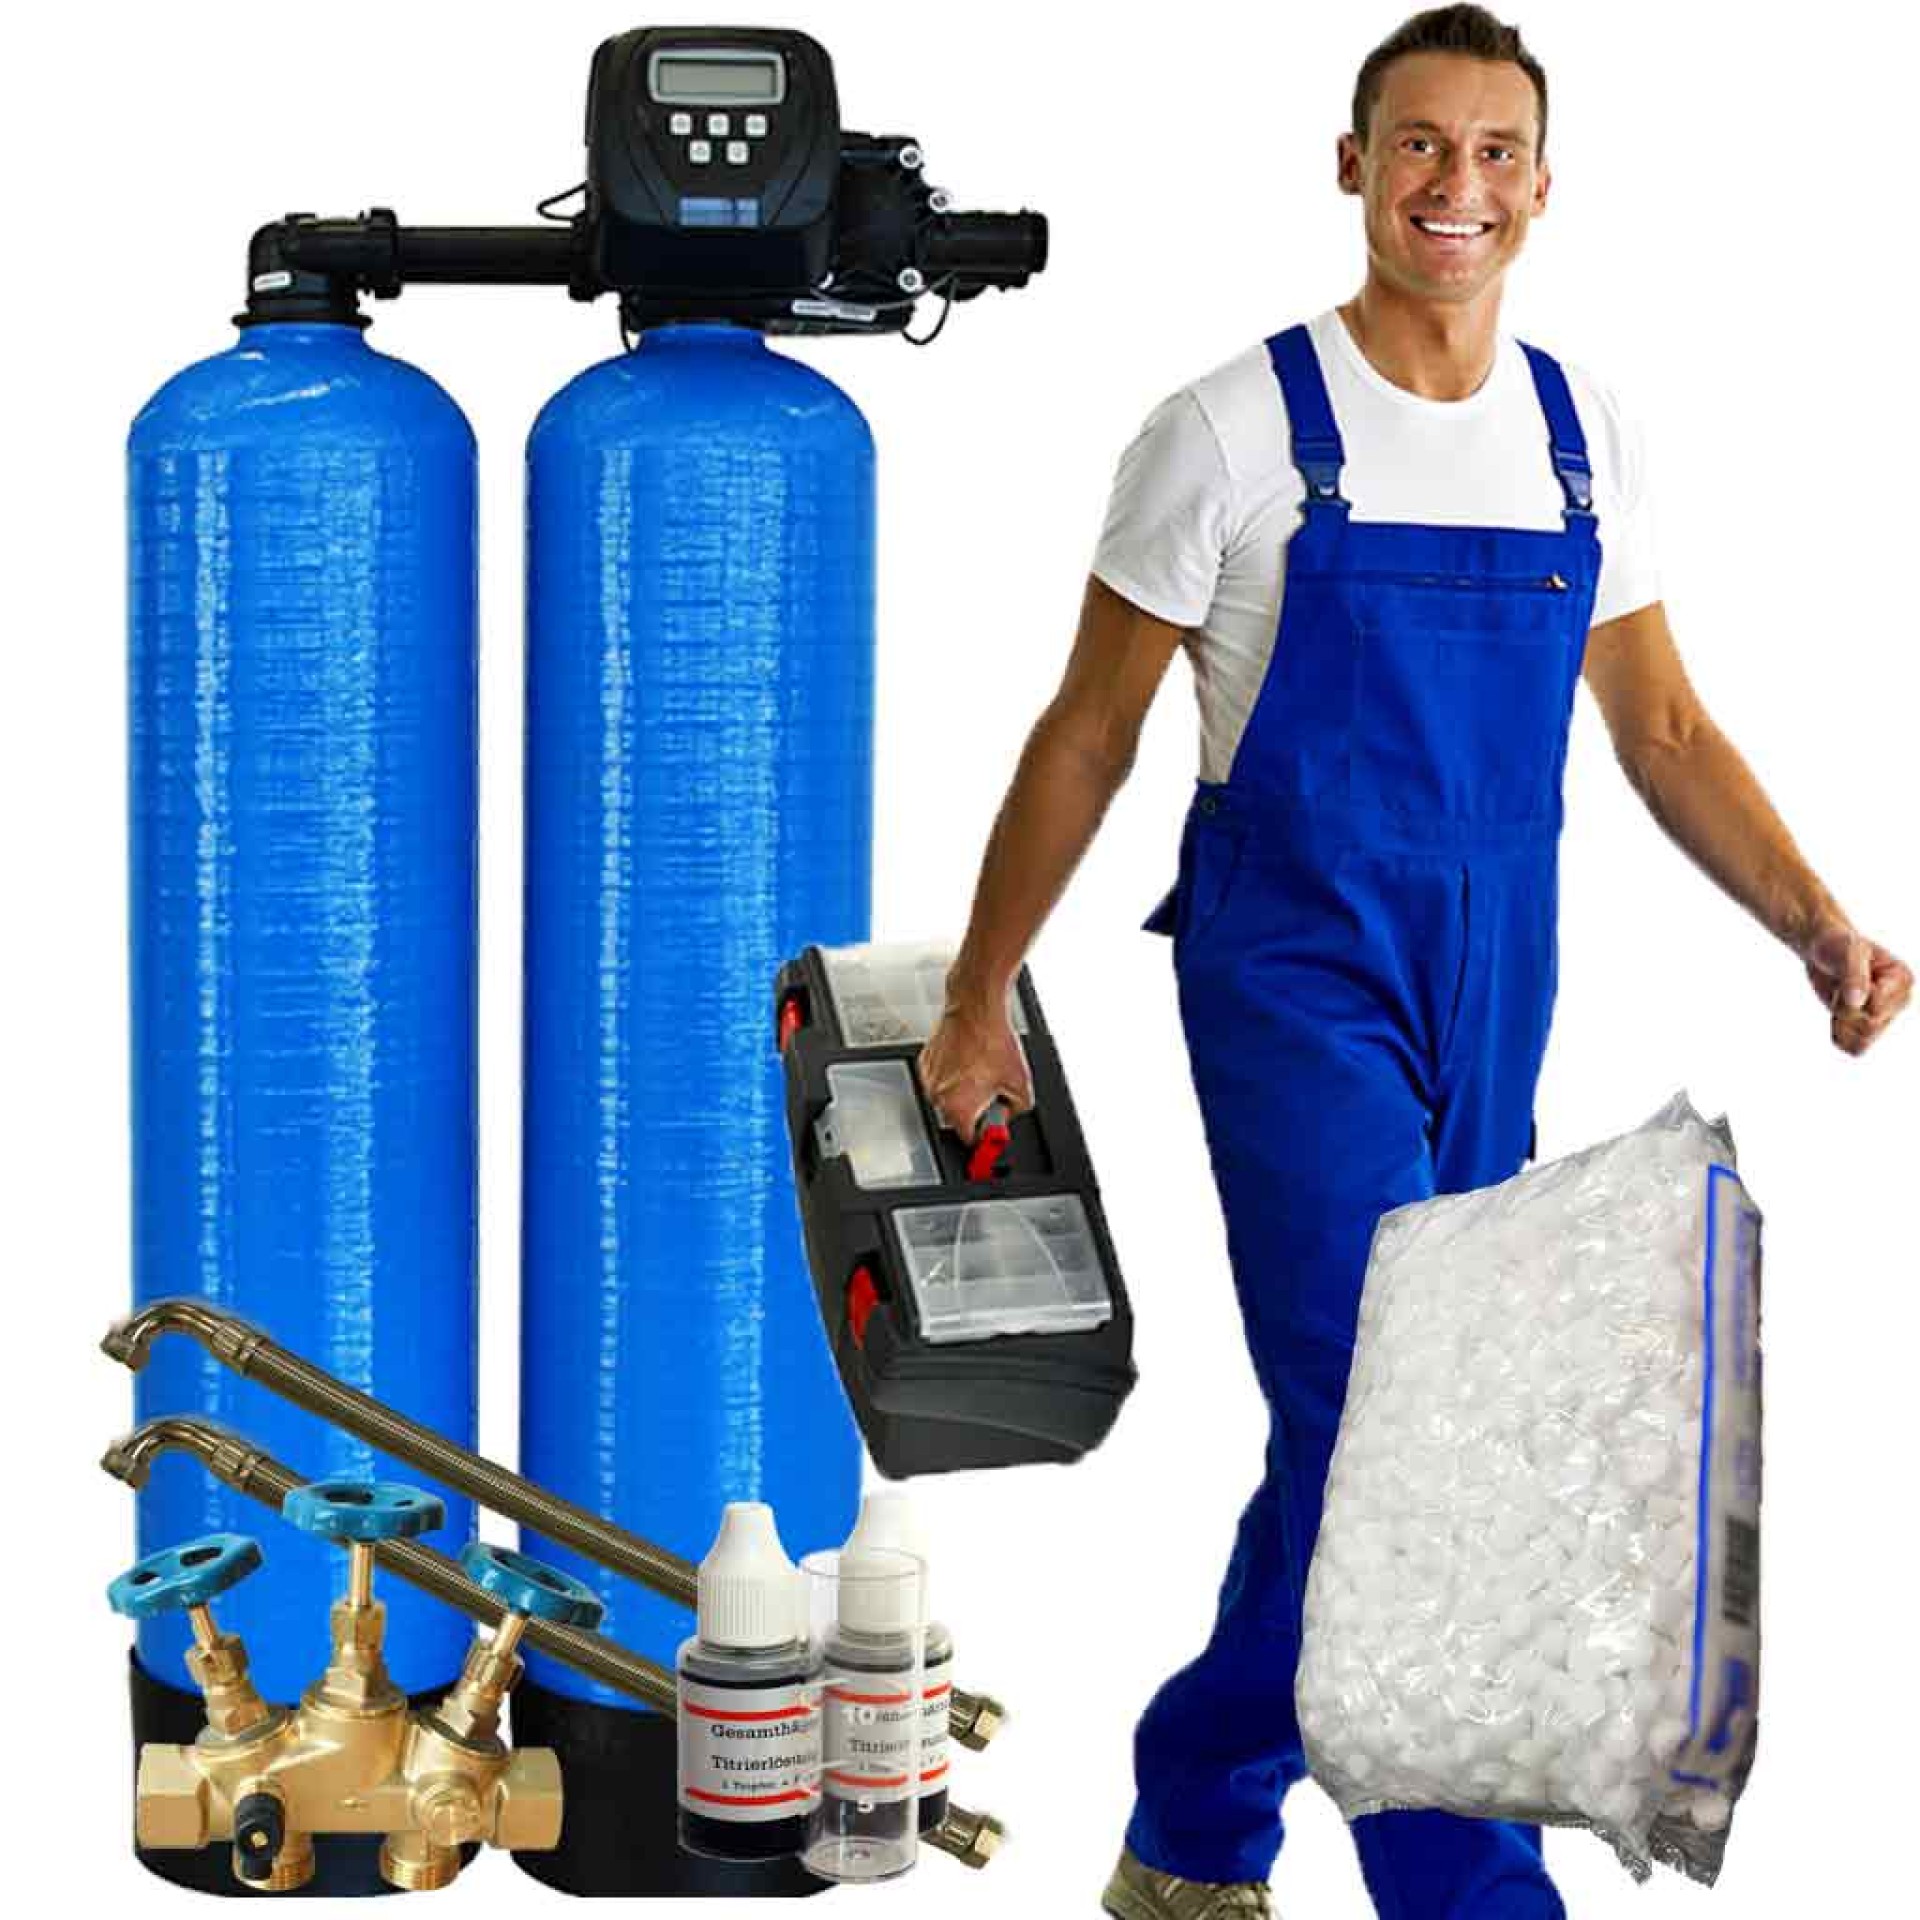 BASIC water softening system in a carefree package for builders